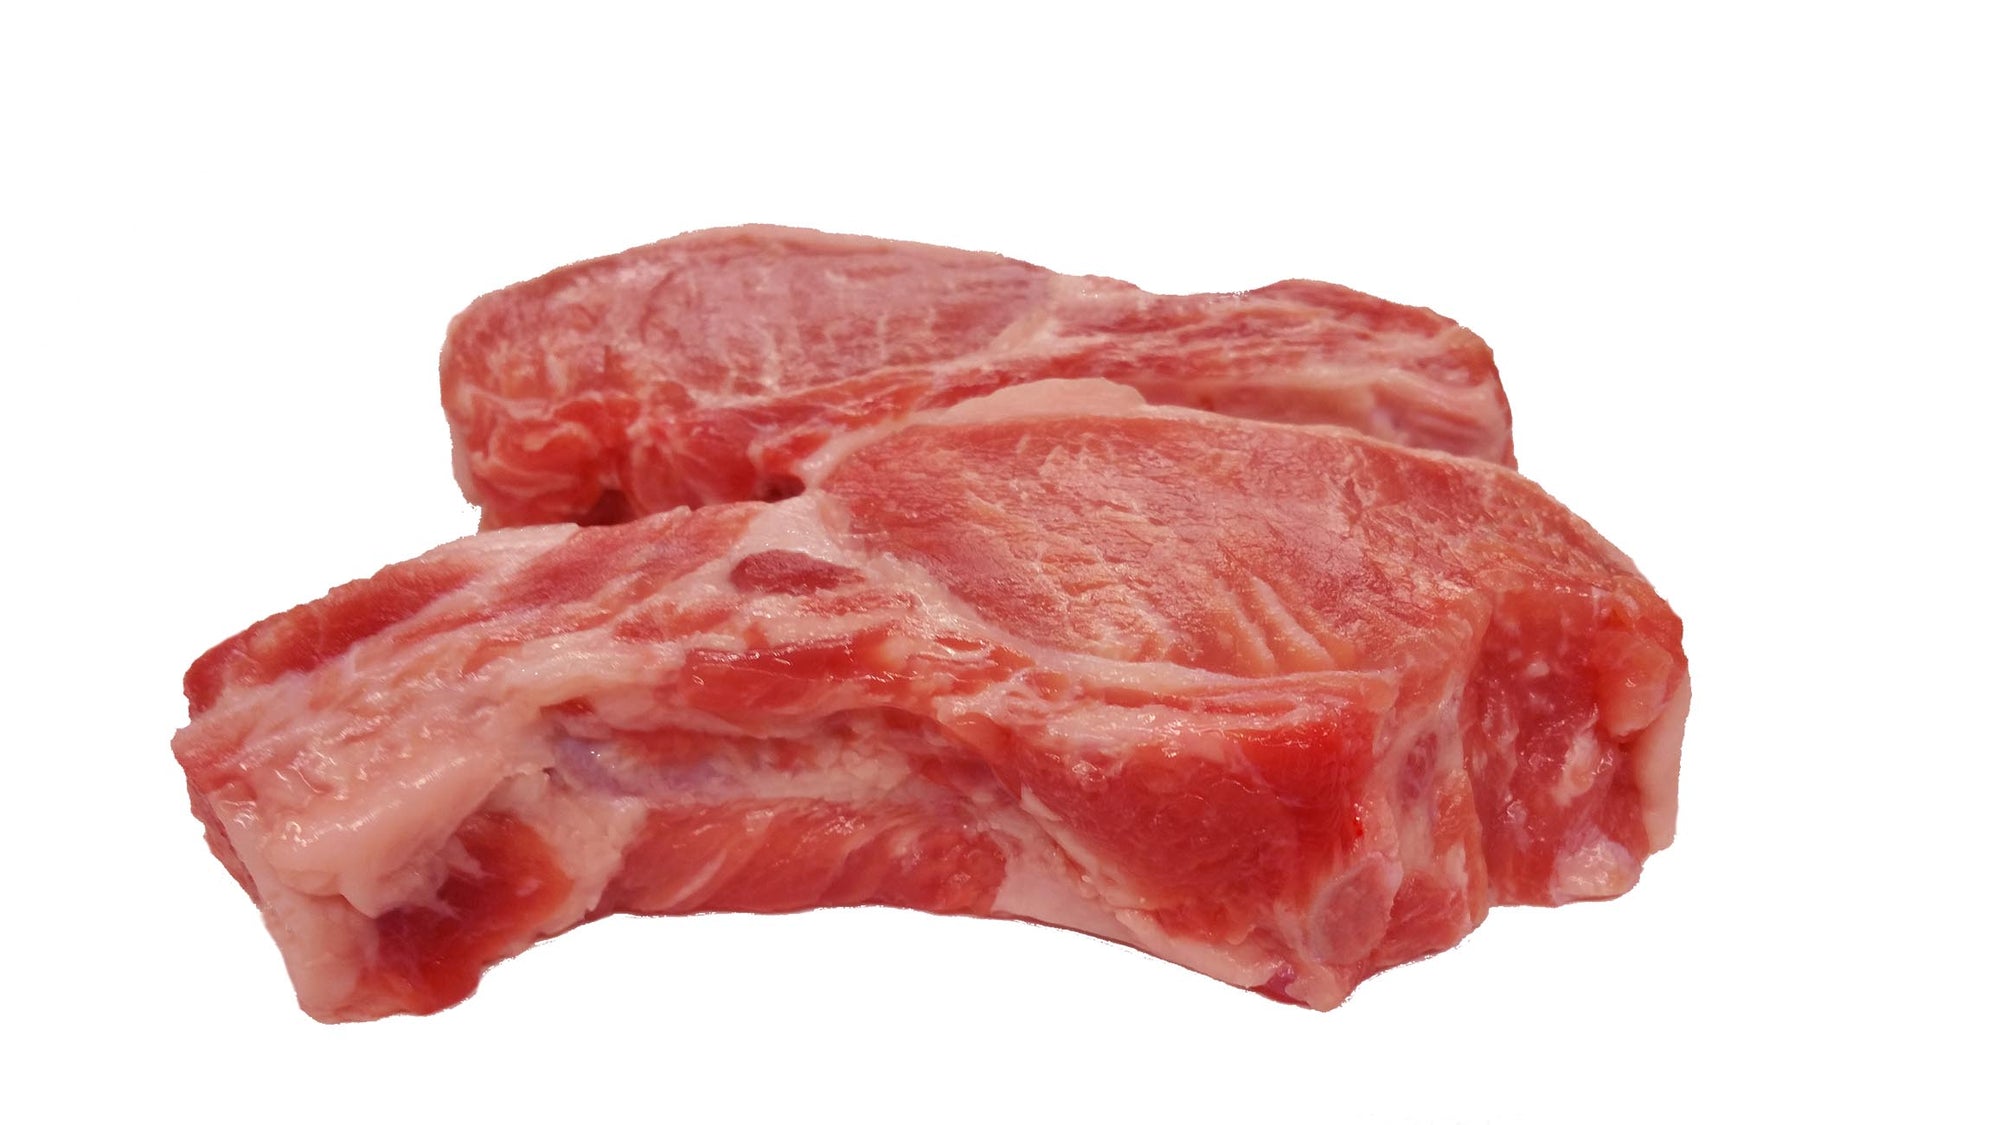 Premium Reserve Pork Chops 1 full rack - 8 chops approximately 8 pounds (Chefs Choice)